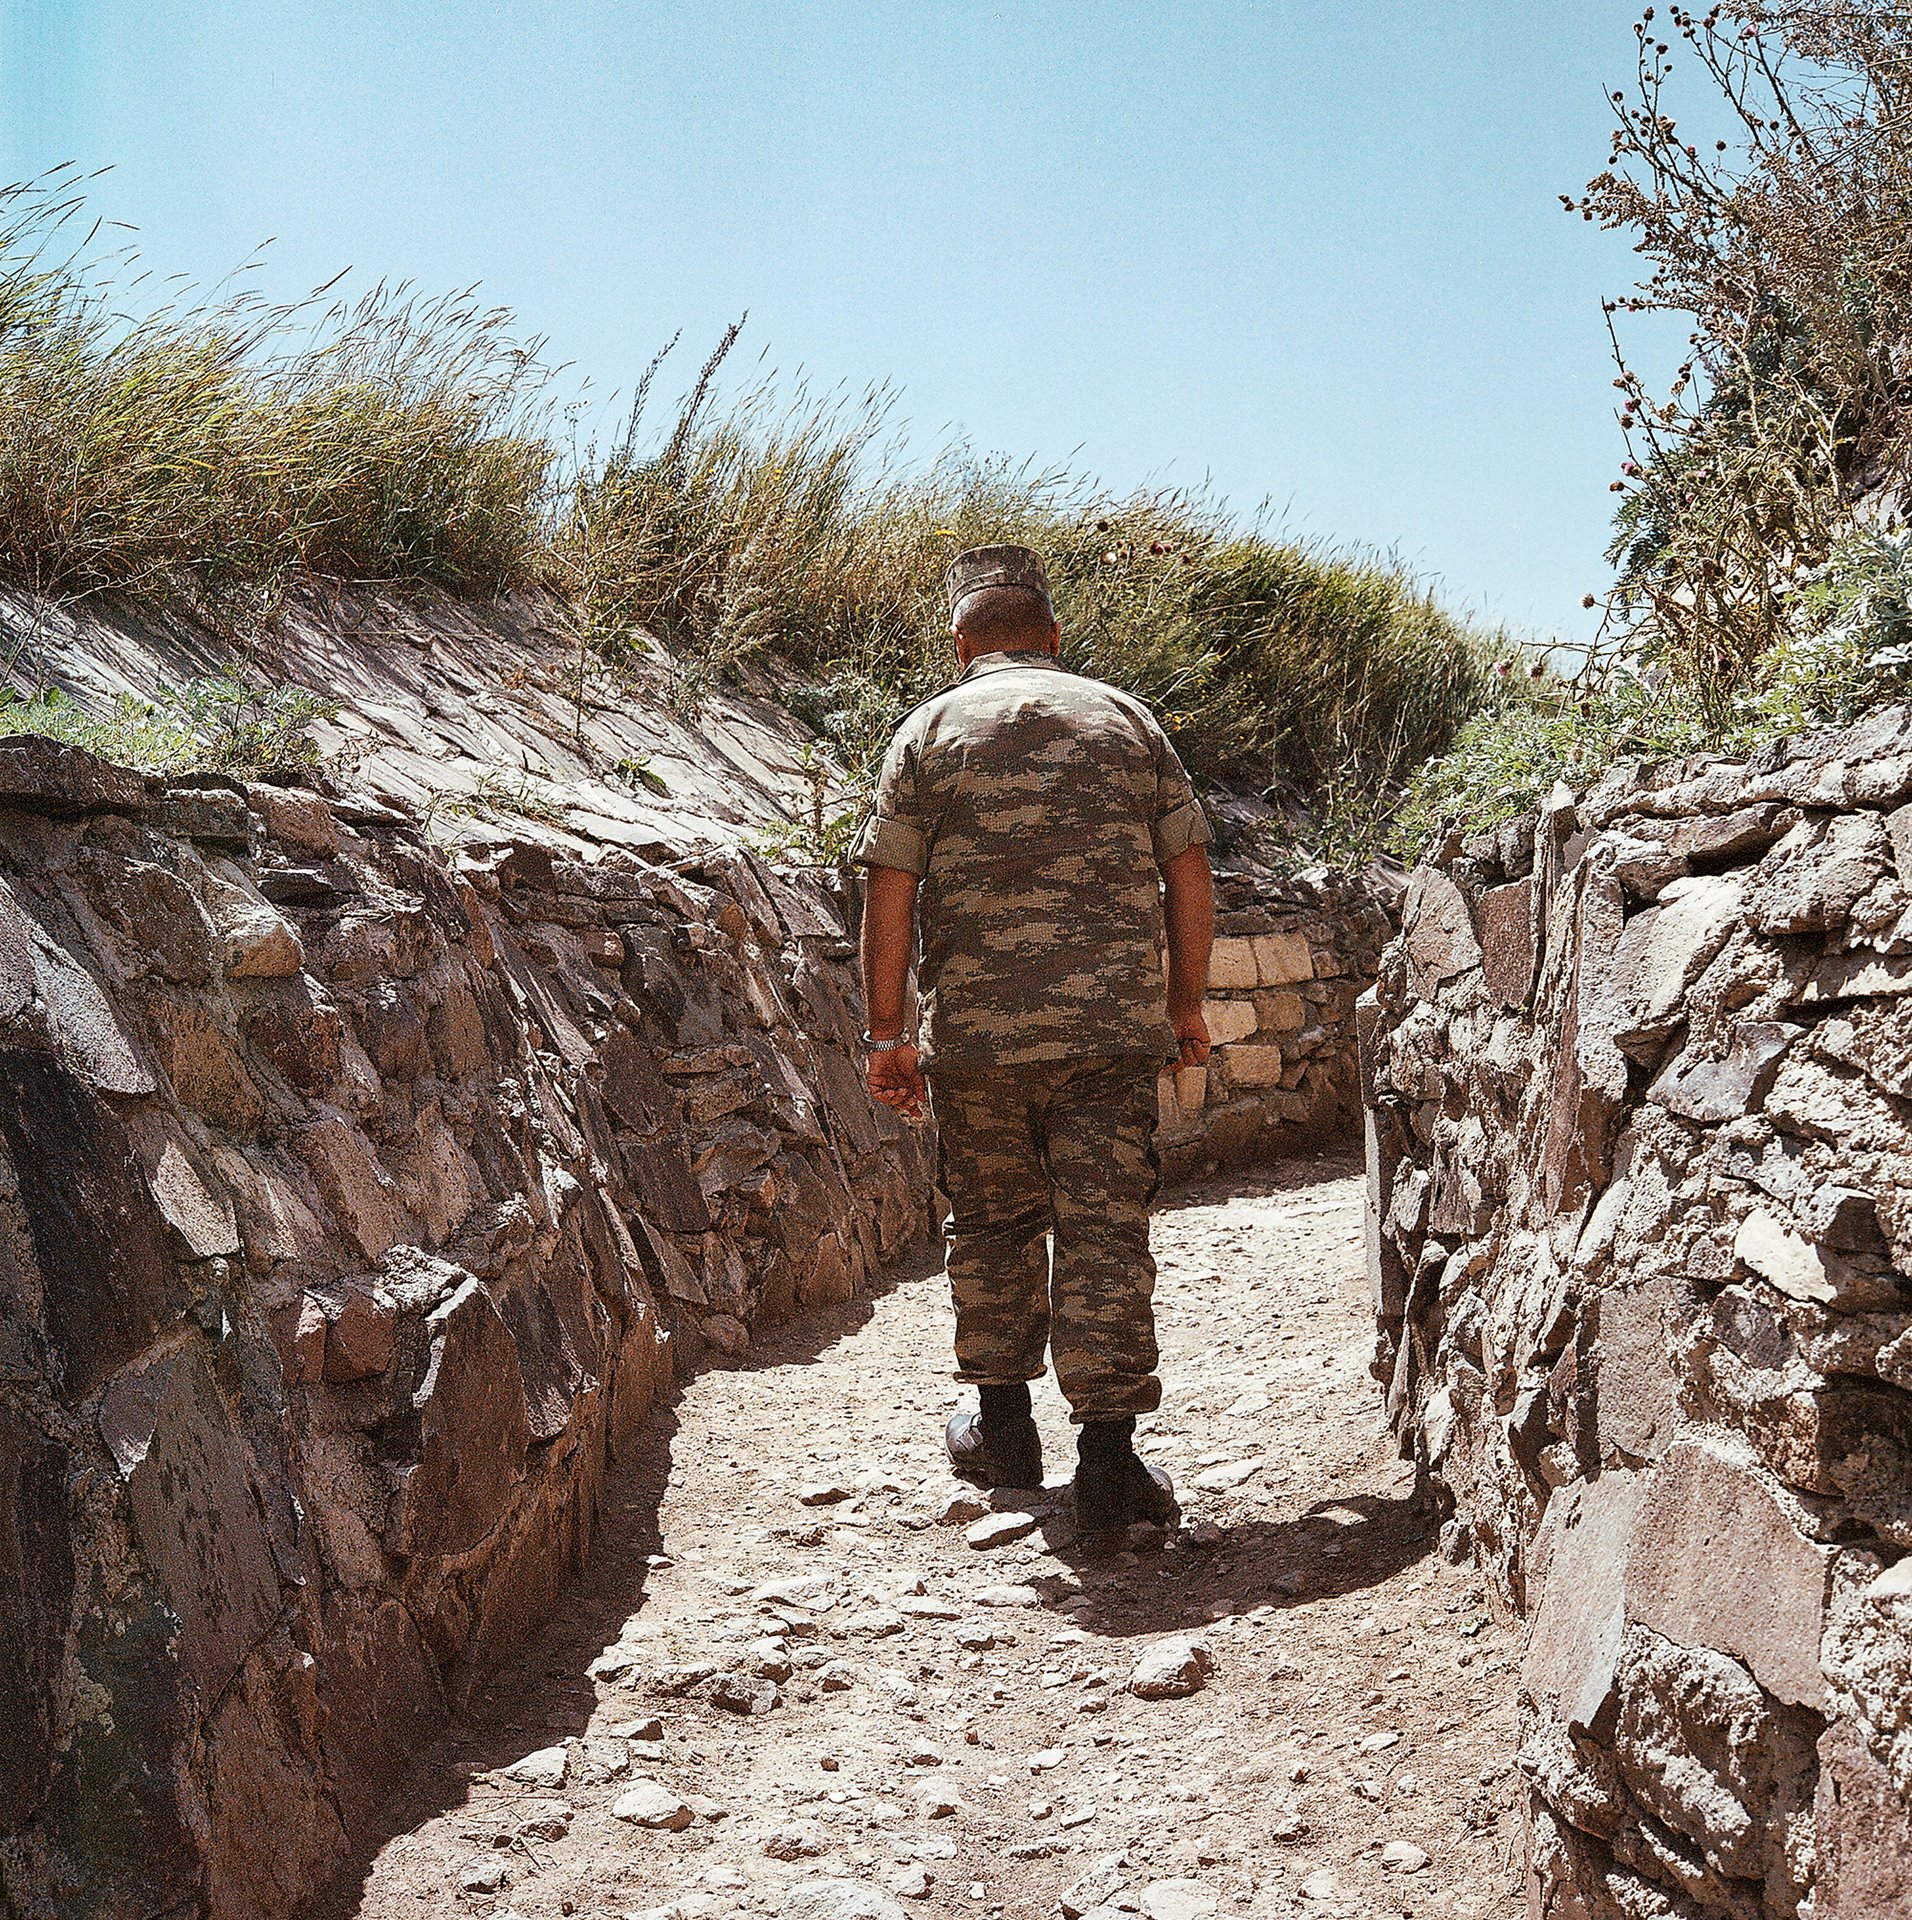 Military patrols secure the trenches near the Armenia-Azerbaijan border, which has been closed for three decades due to war. The <em>Satyrus effendi </em>butterfly, named after Rustam Effendi, the photographer&rsquo;s father, flies across this border, traversing the Zangezur mountain ridge. Nakhchivan, Azerbaijan.